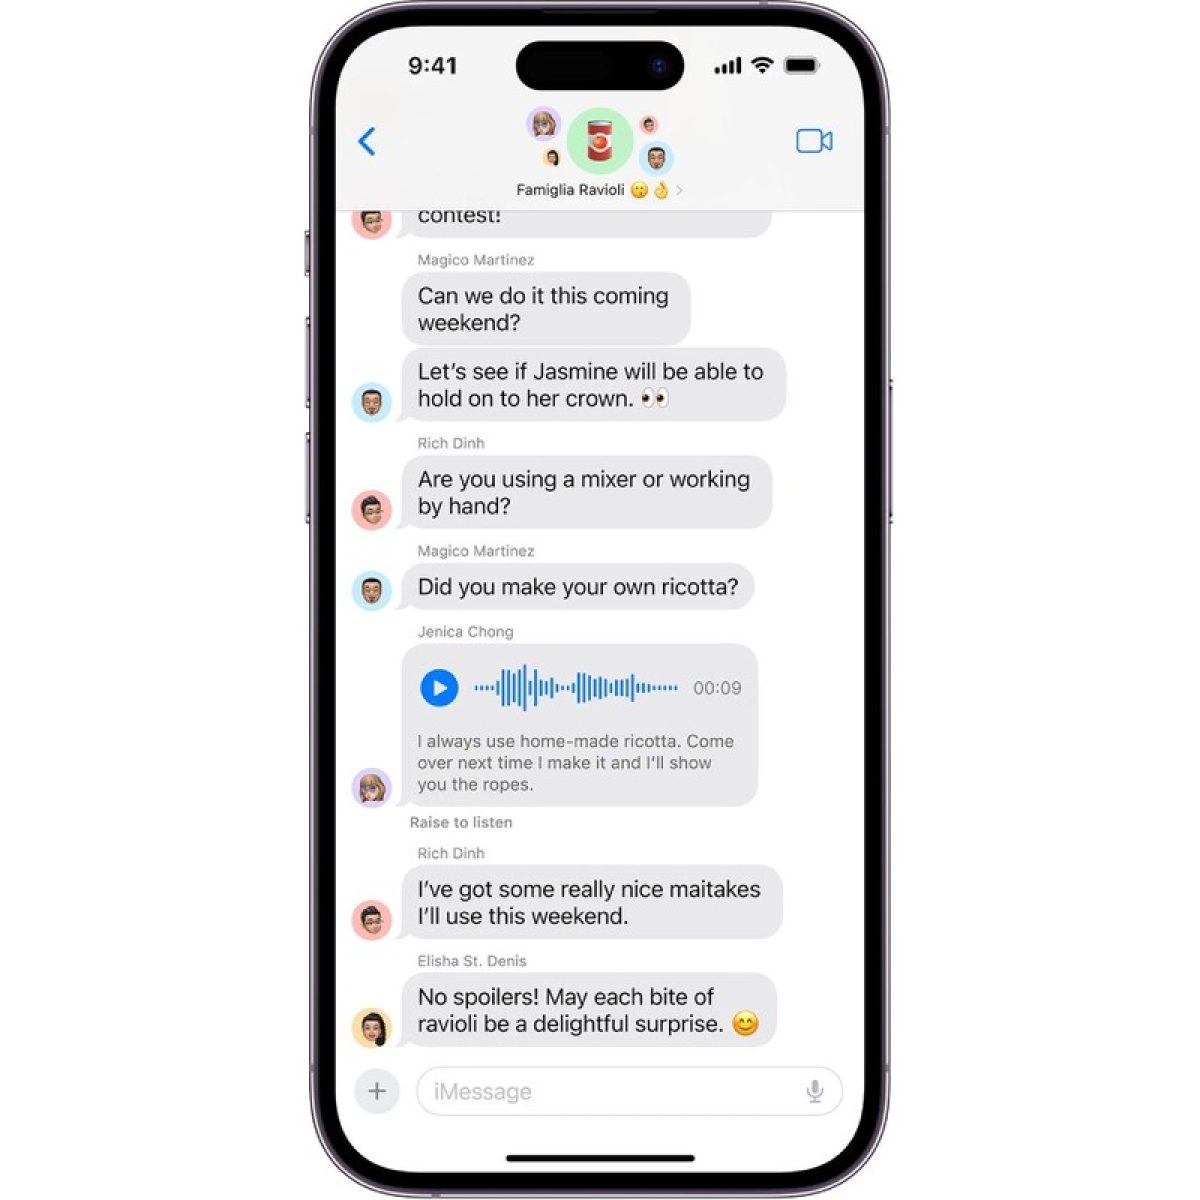 How To Enable Voice Recognition For Texting On IPhone